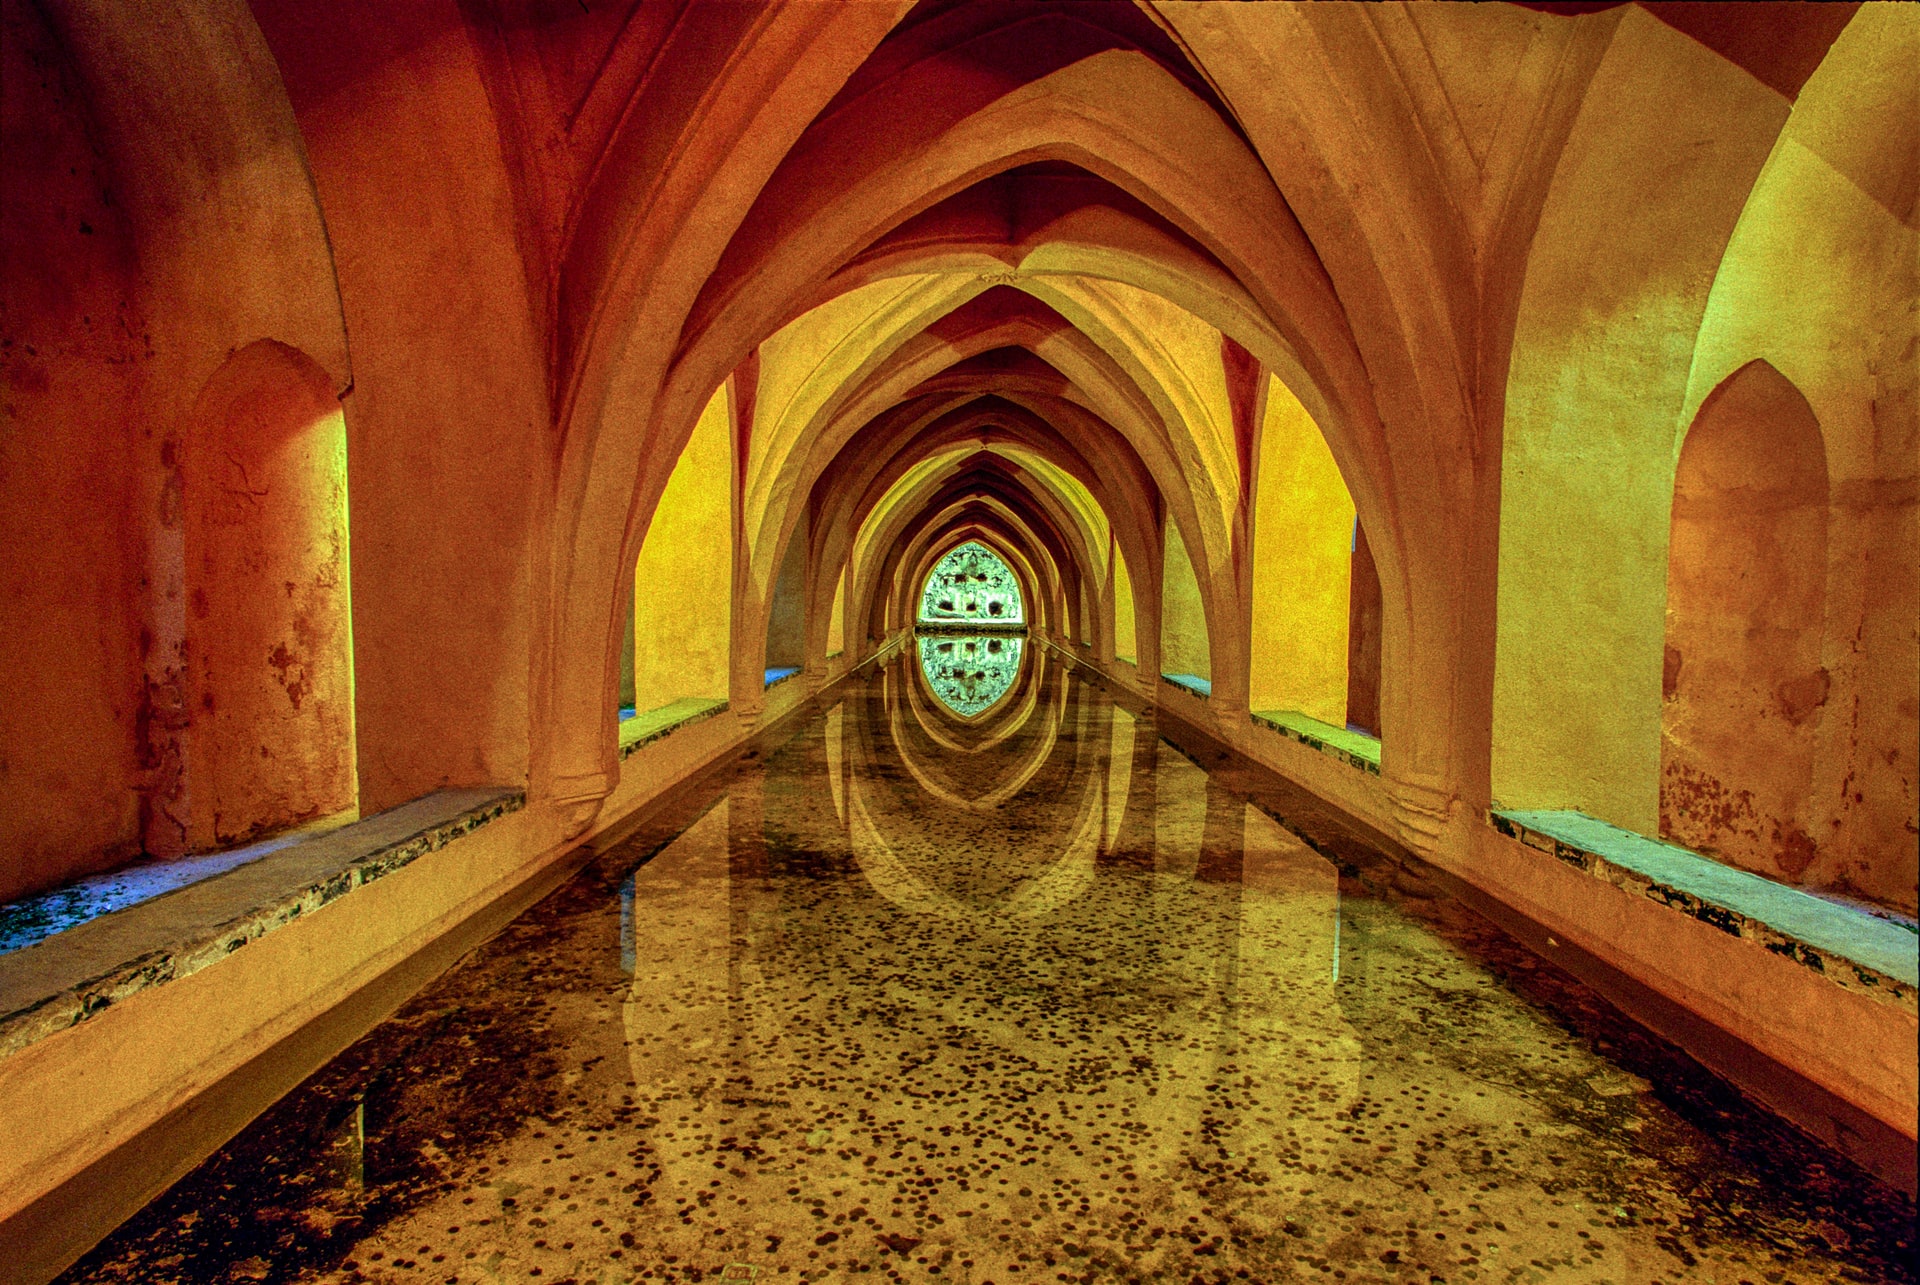 Baths of María Padilla in the Real Alcazar Palace in Seville, from https://unsplash.com/photos/FLyYPC73wgI